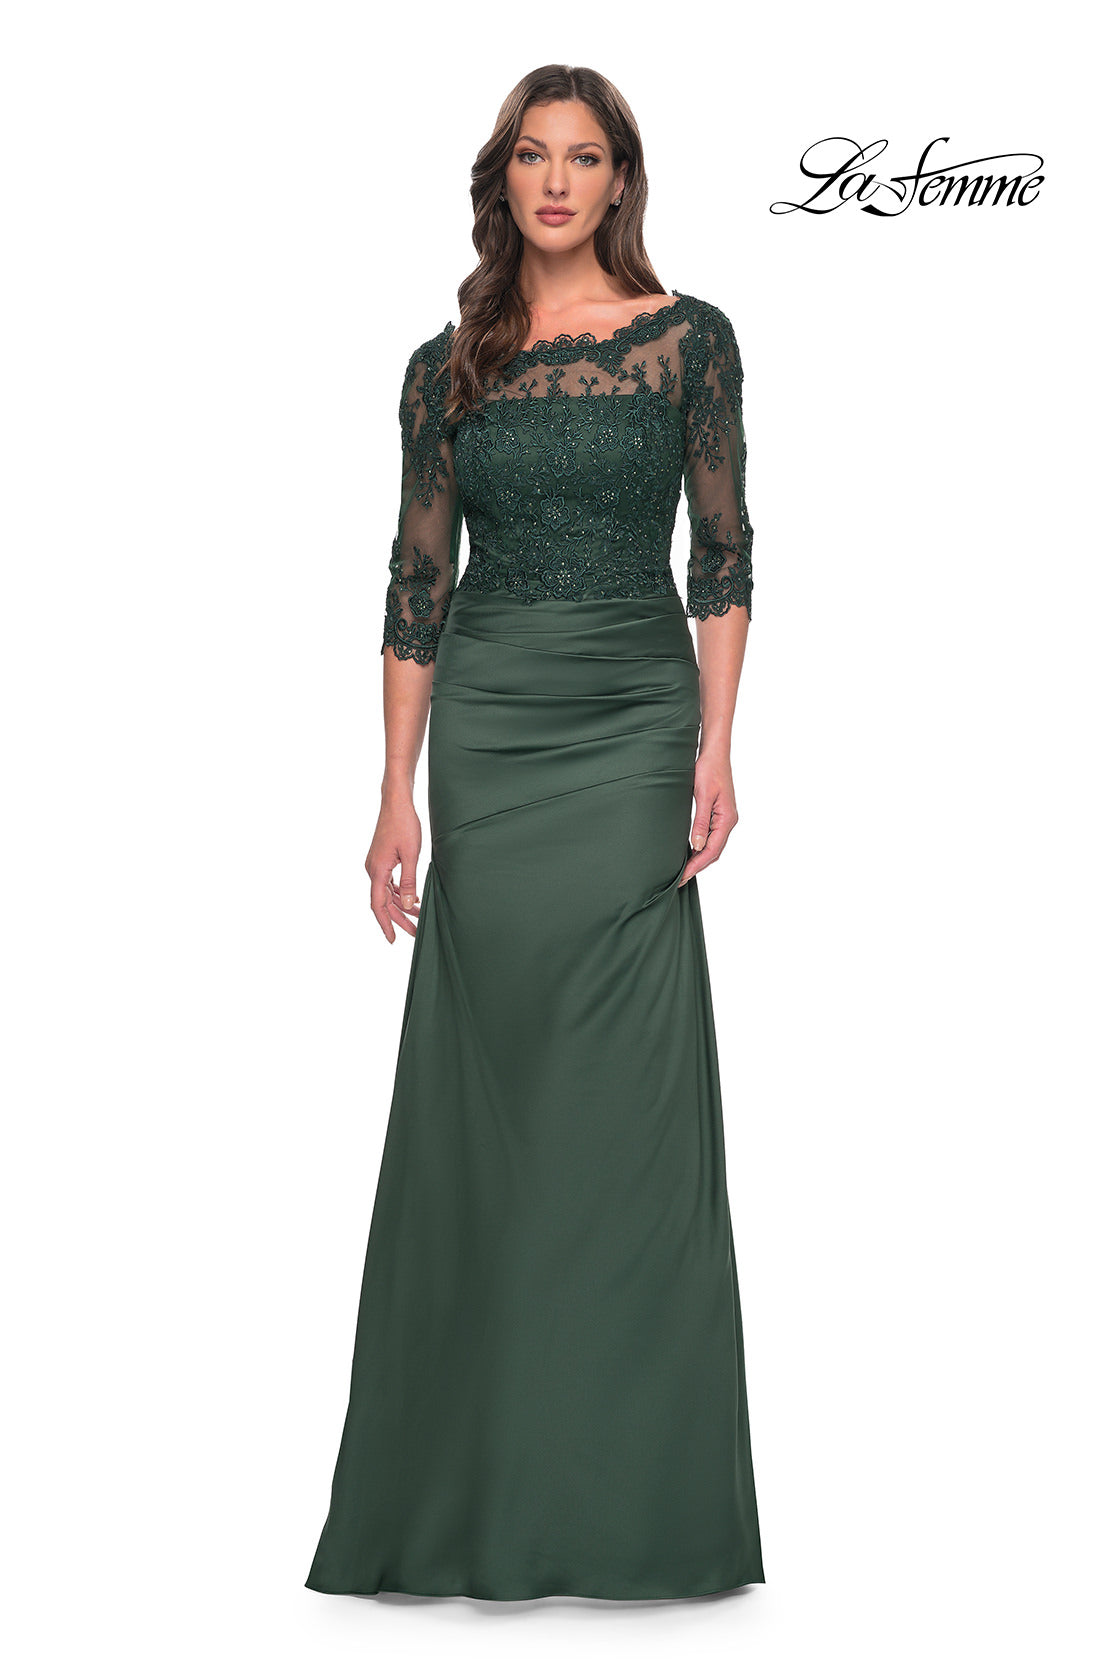 Satin and Lace Illusion Off Shoulder Gown